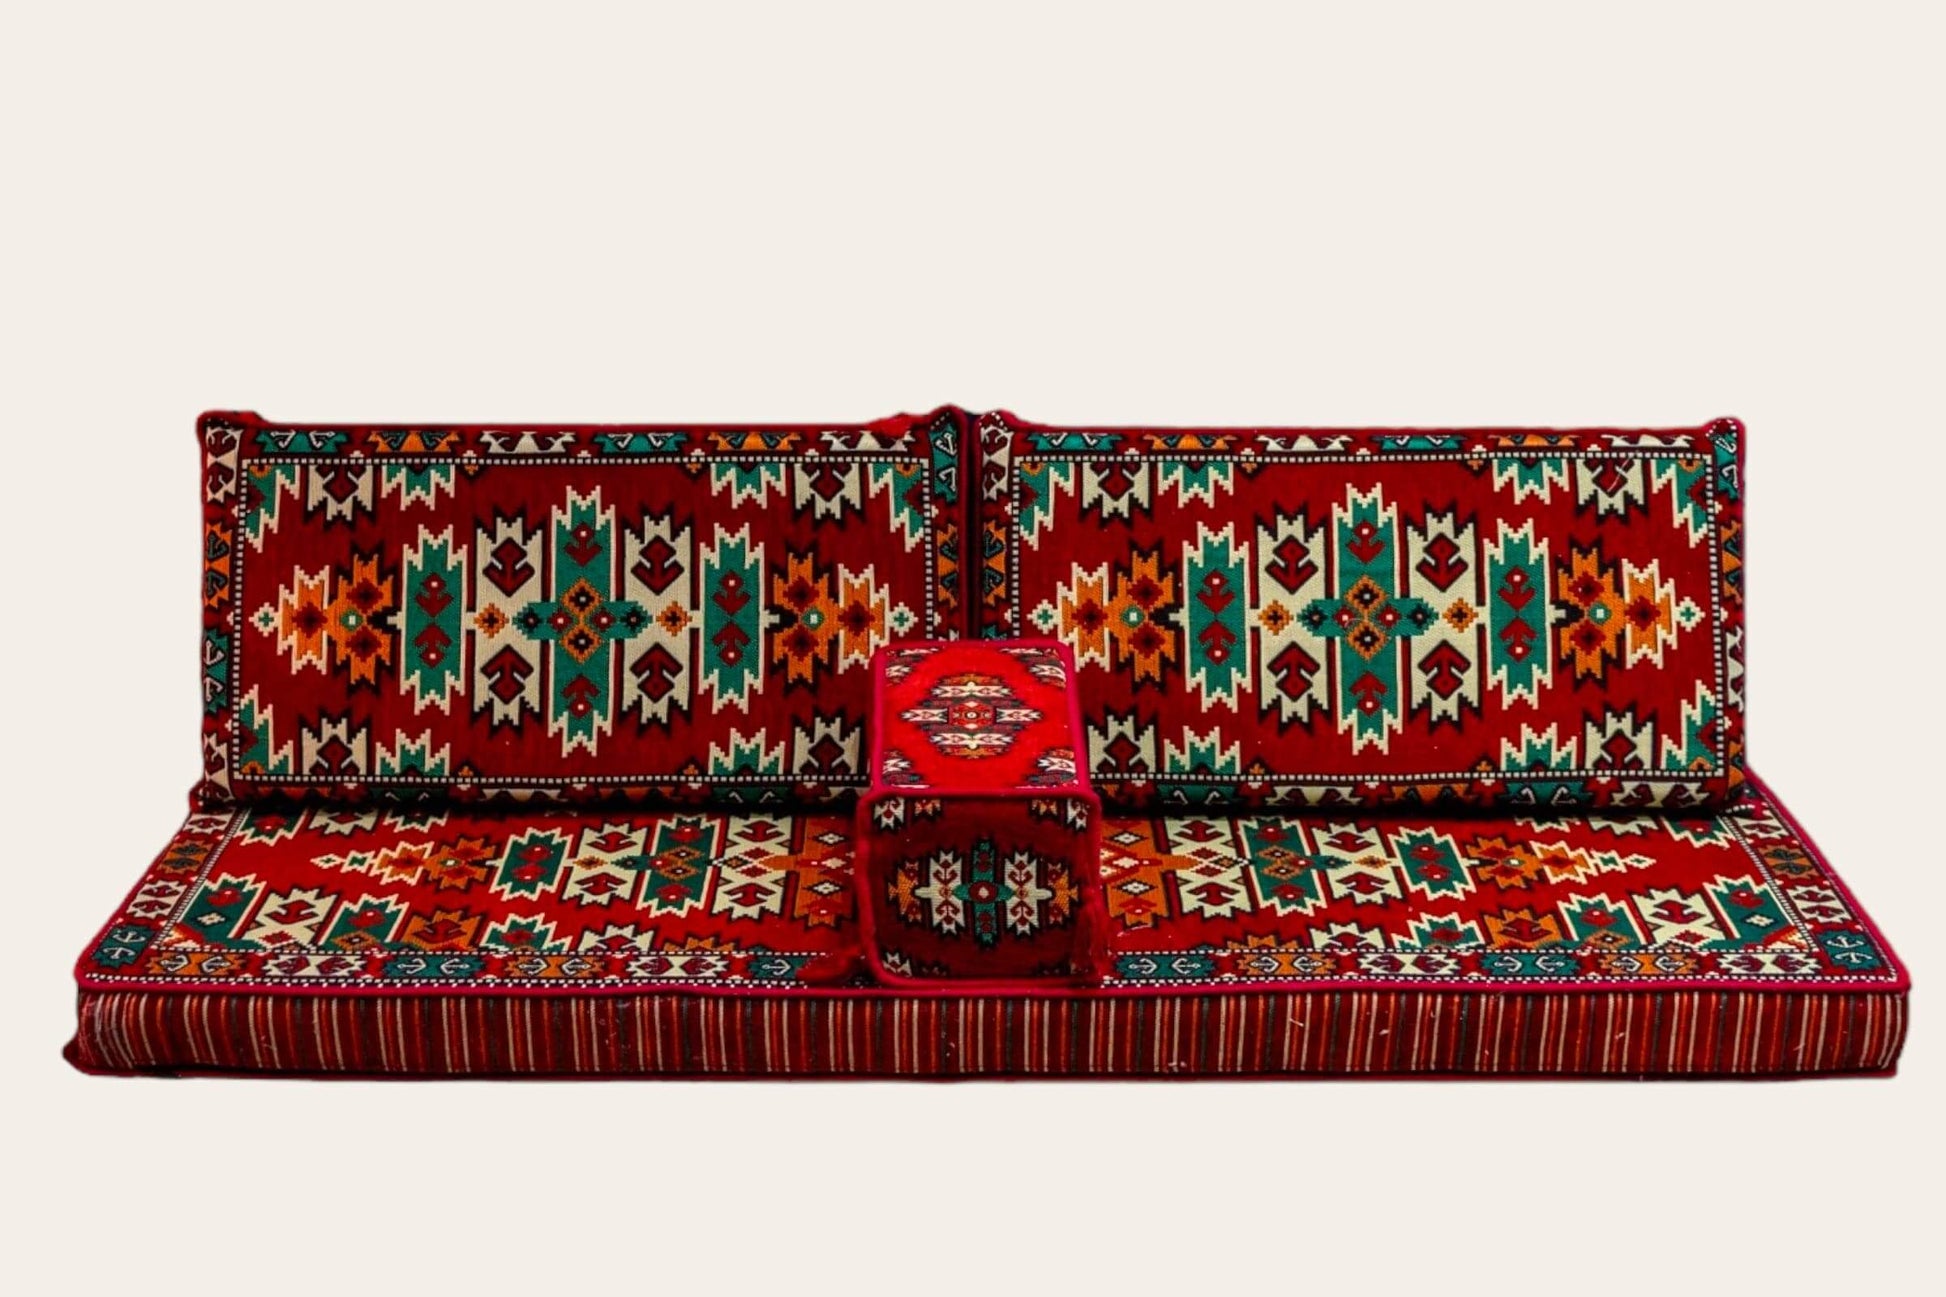 Authentic decorative and comfortable floor cushions Made in Turkiye, %100 Cotton, washable covers with firm sponge filling 4pc Cushion, 1x 70cmX190cm, 2x Cushion 50cmX95cm 1x 22cmX49cm Experience the elegance of a Majlis-style seating arrangement with our